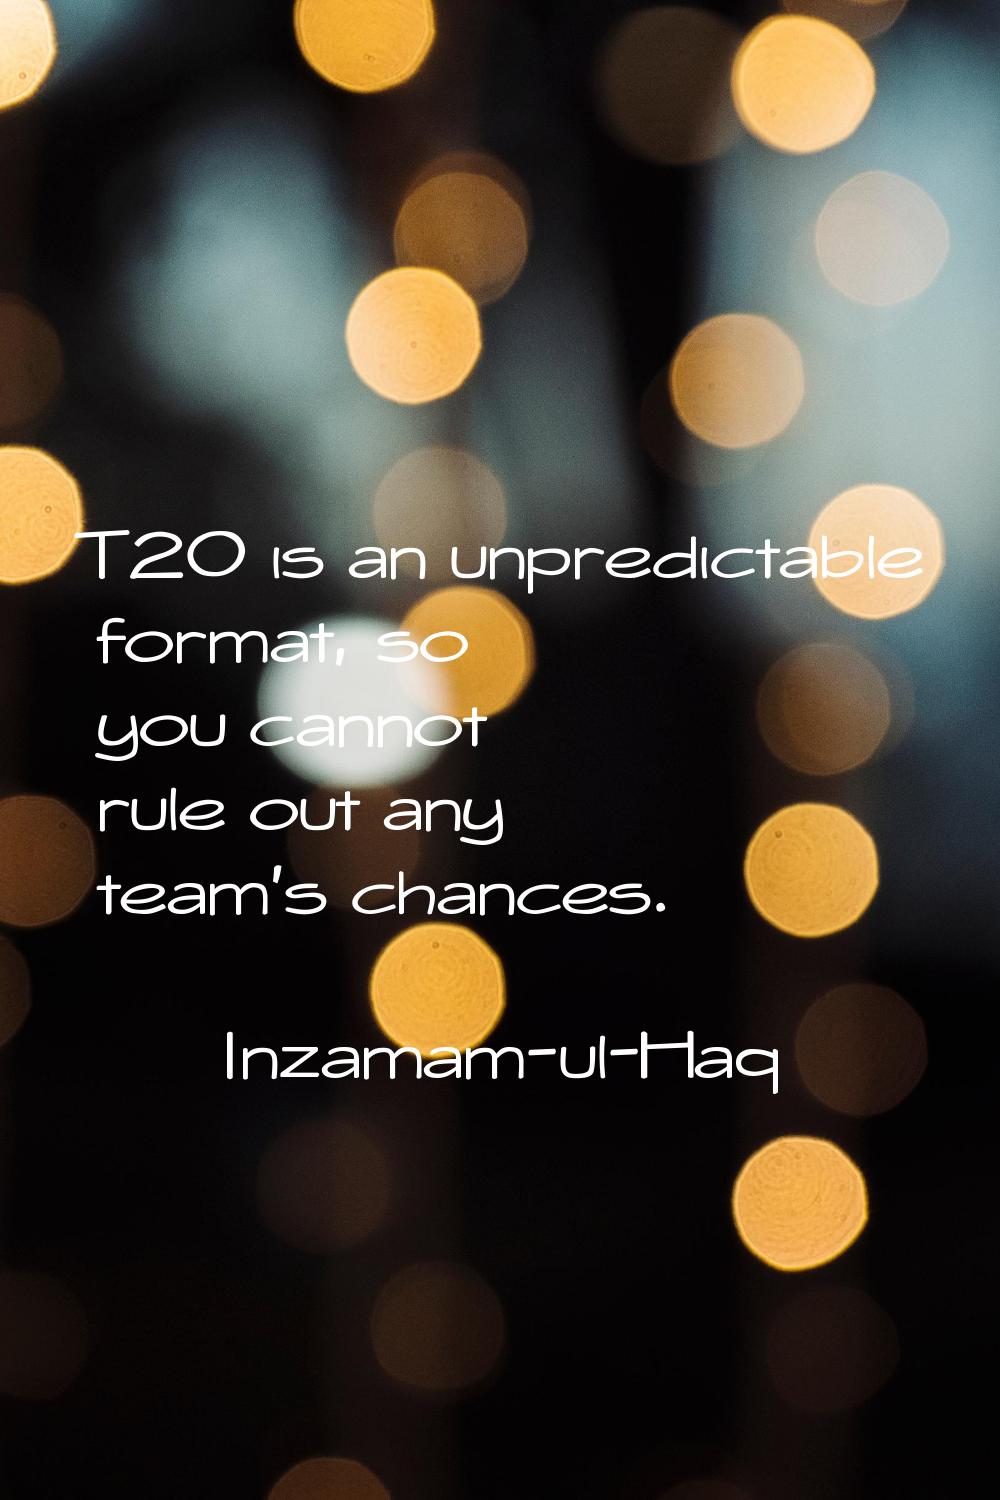 T20 is an unpredictable format, so you cannot rule out any team's chances.